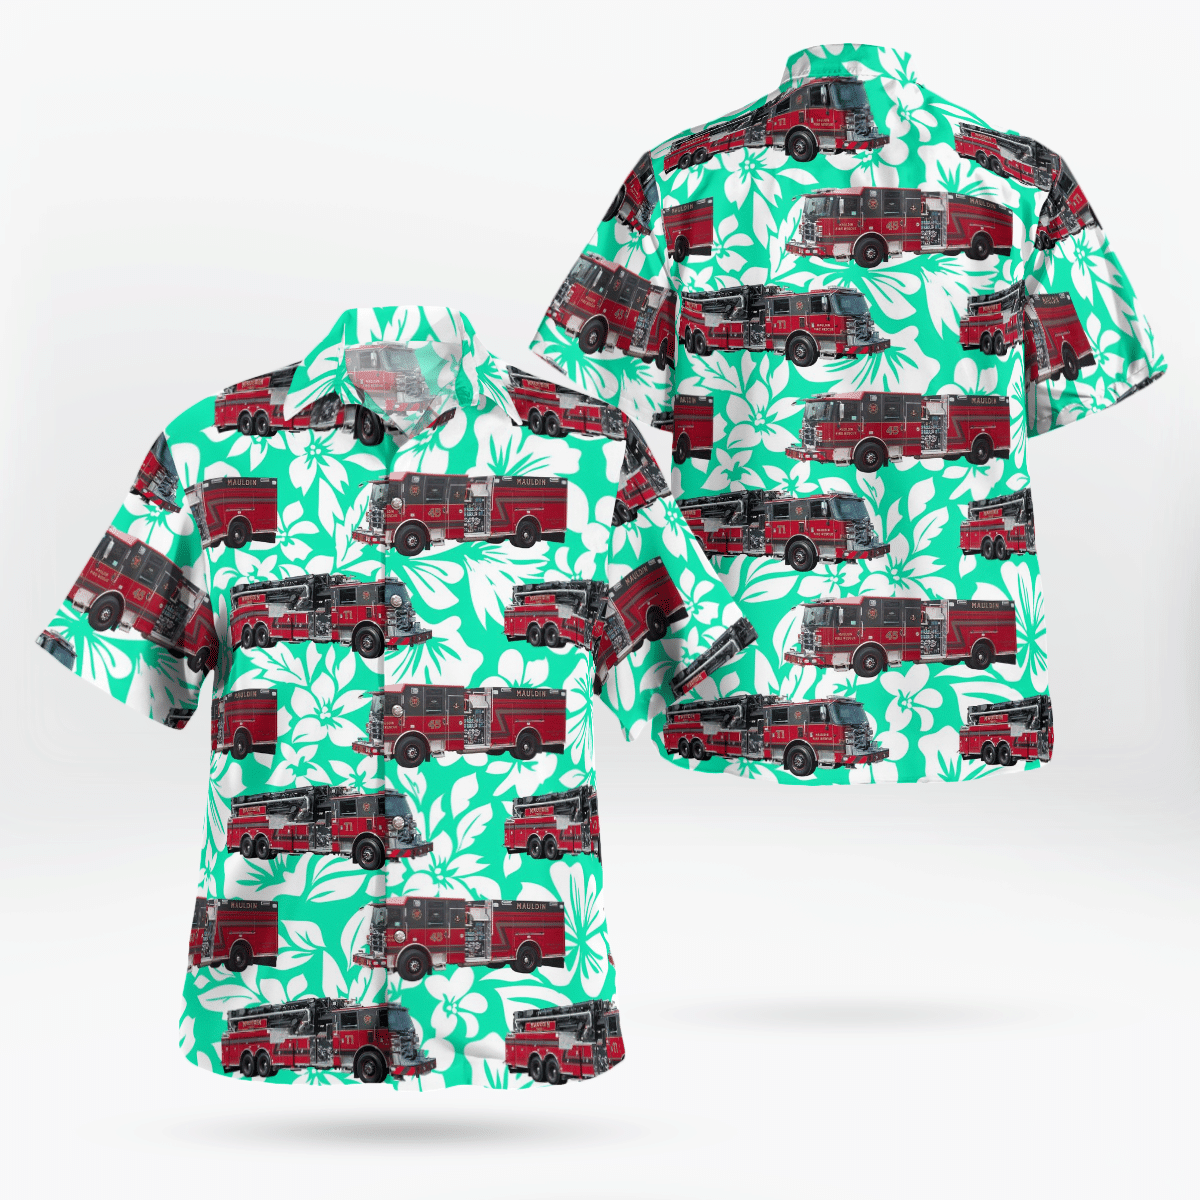 If you want to be noticed, wear These Trendy Hawaiian Shirt 96